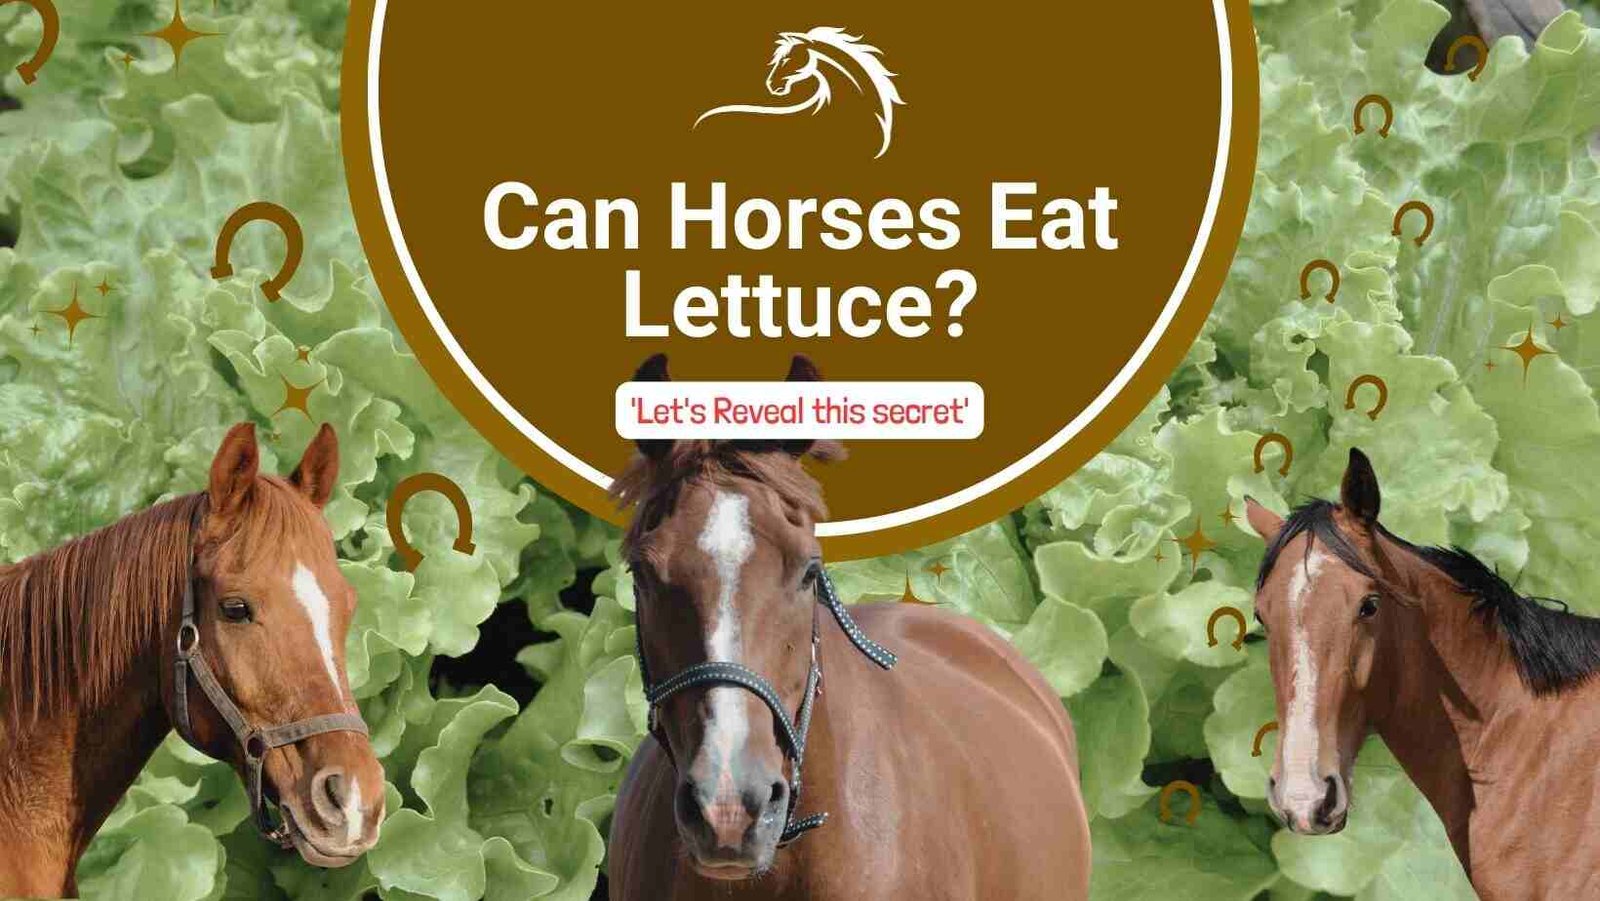 Three horses wearing halters, surrounded by lettuce leaves, with text revealing the secret of whether horses can eat lettuce